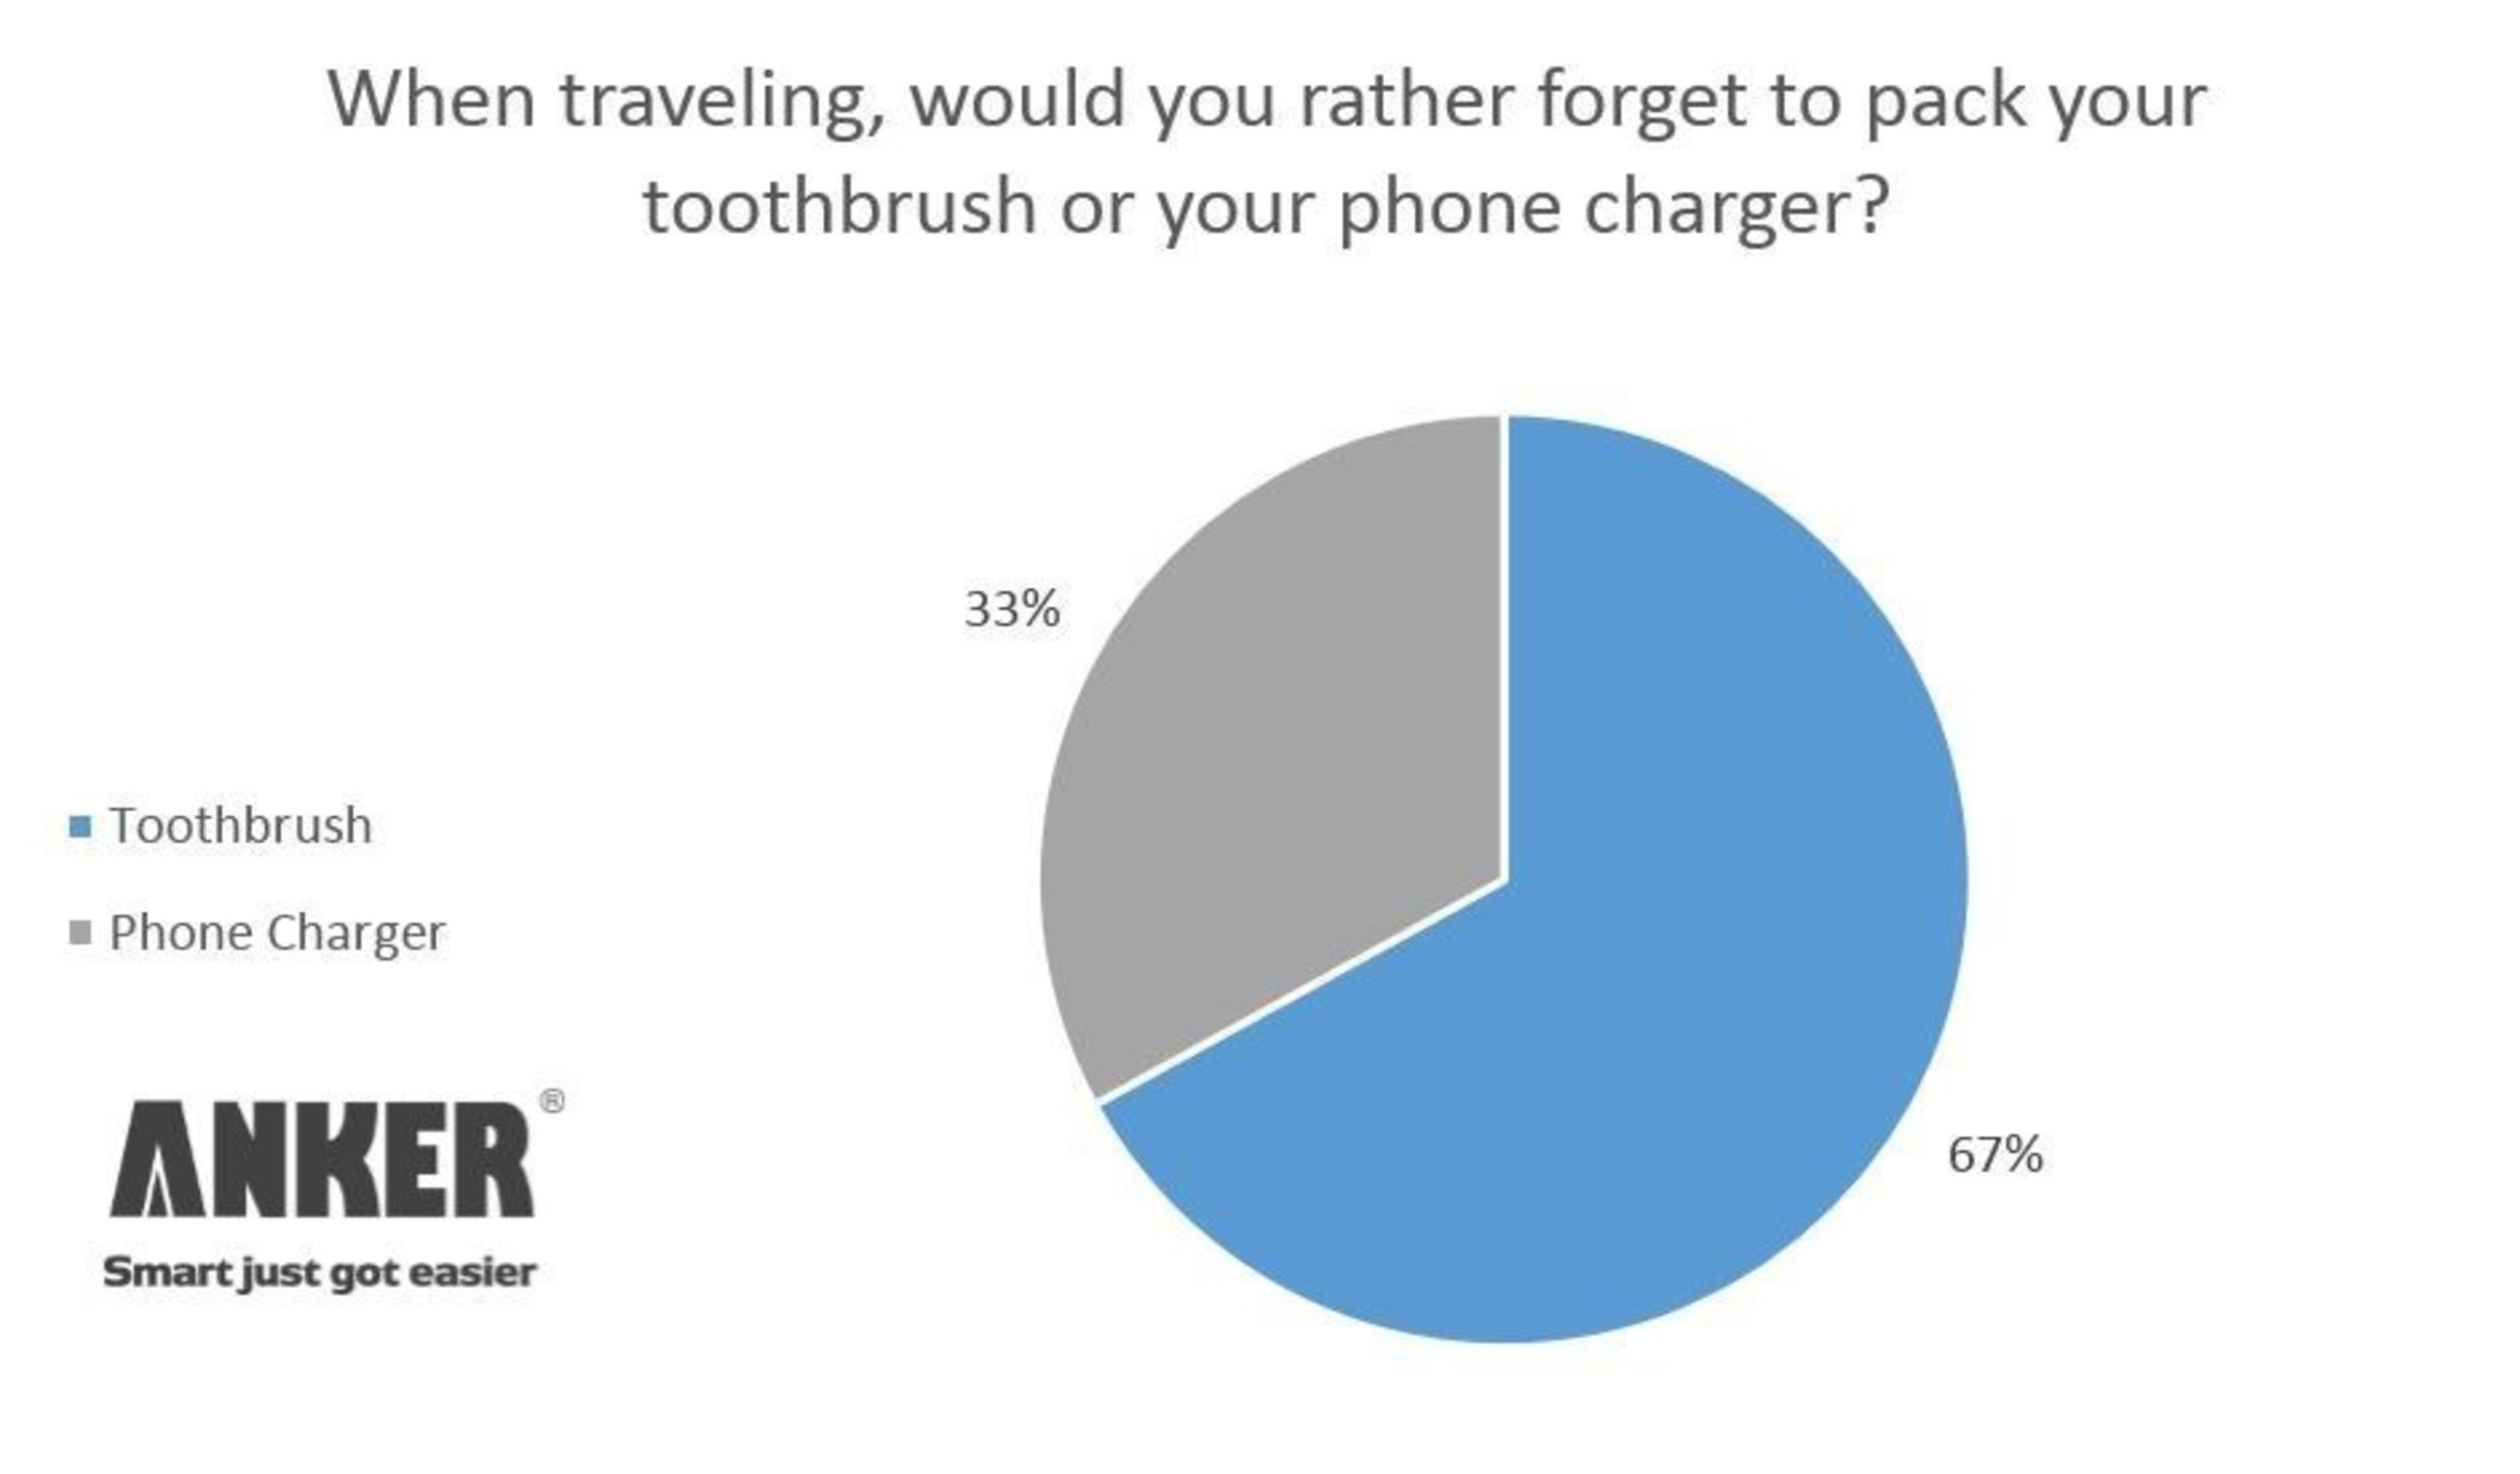 A new survey from Anker, the leader in mobile power, reveals that when traveling power even trumps personal hygiene: two-thirds of respondents would rather forget their toothbrush than their phone charger. (PRNewsFoto/Anker)